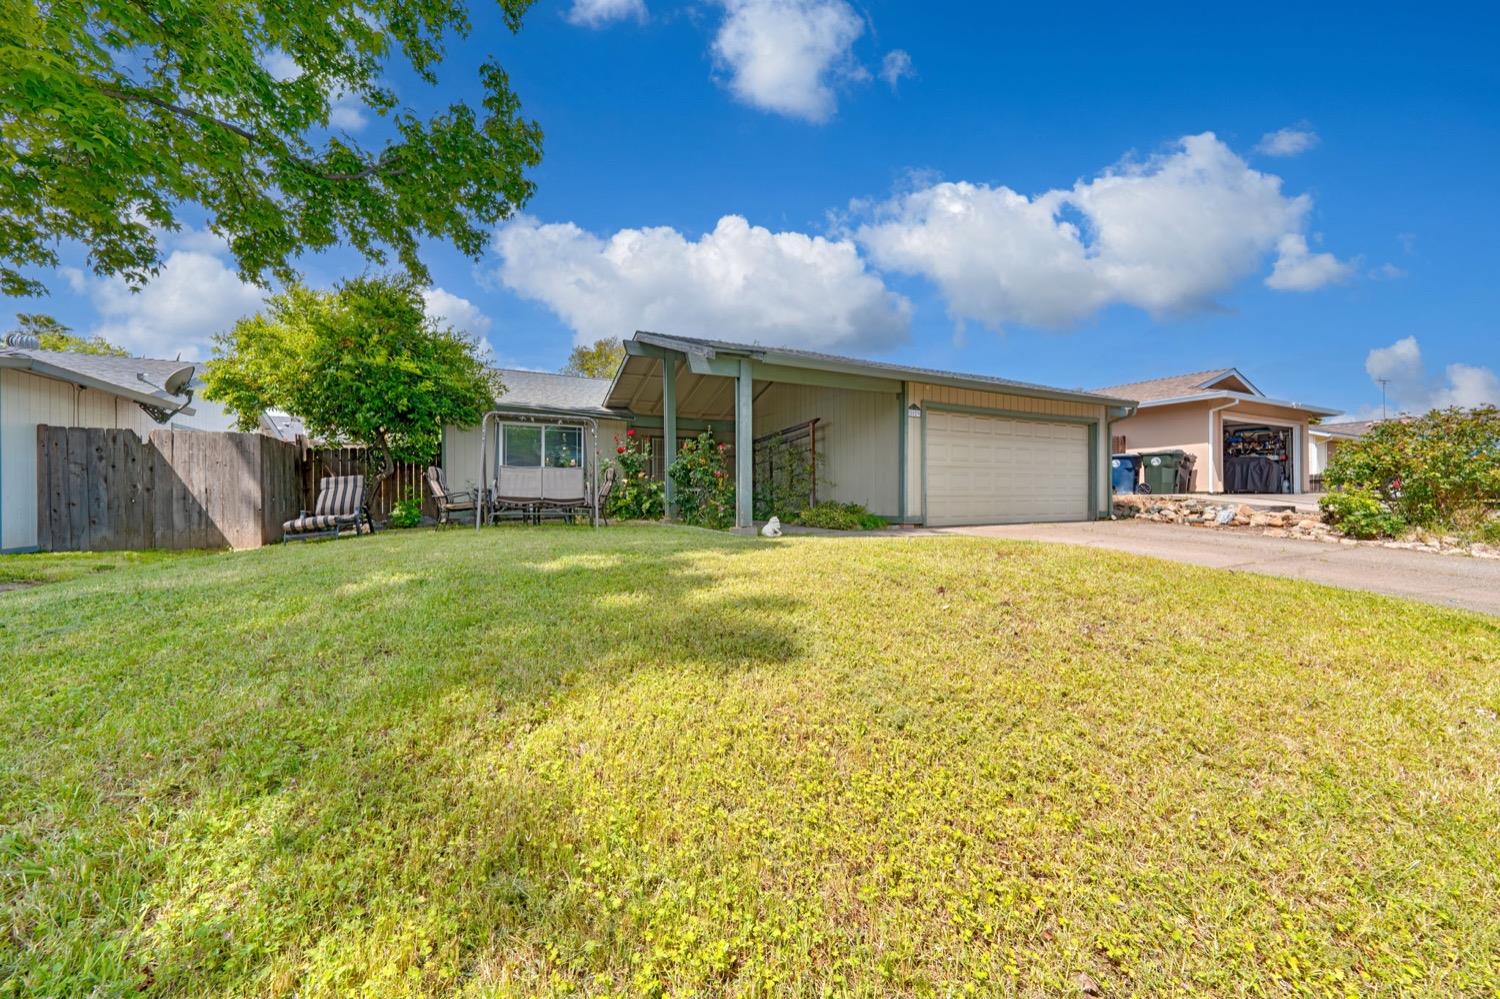 Photo of 8029 Ramblewood Wy in Citrus Heights, CA